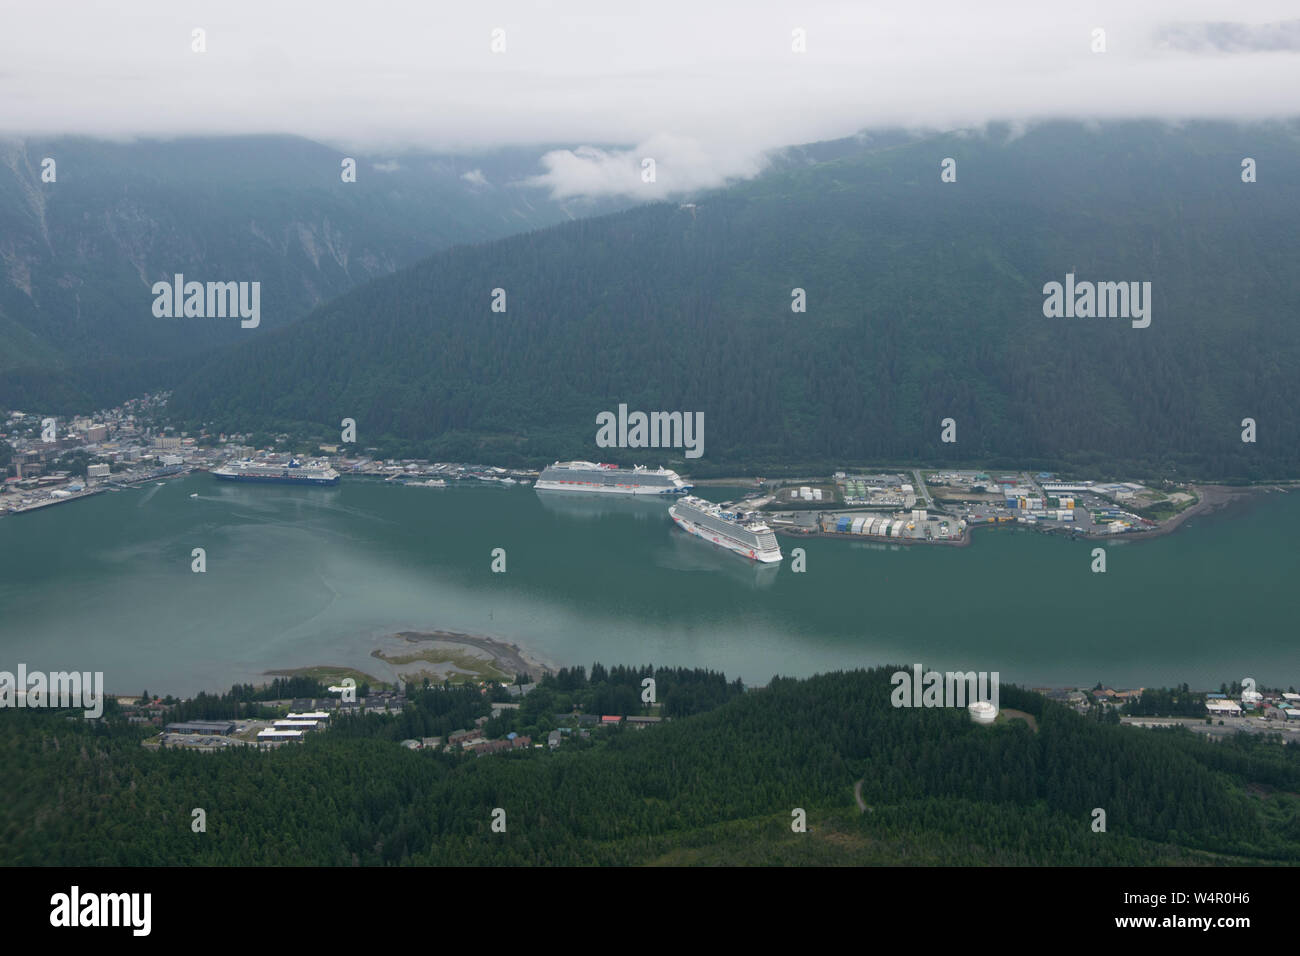 Aerial view of Norwegian Joy and other cruise ships in Juneau, Alaska. Stock Photo